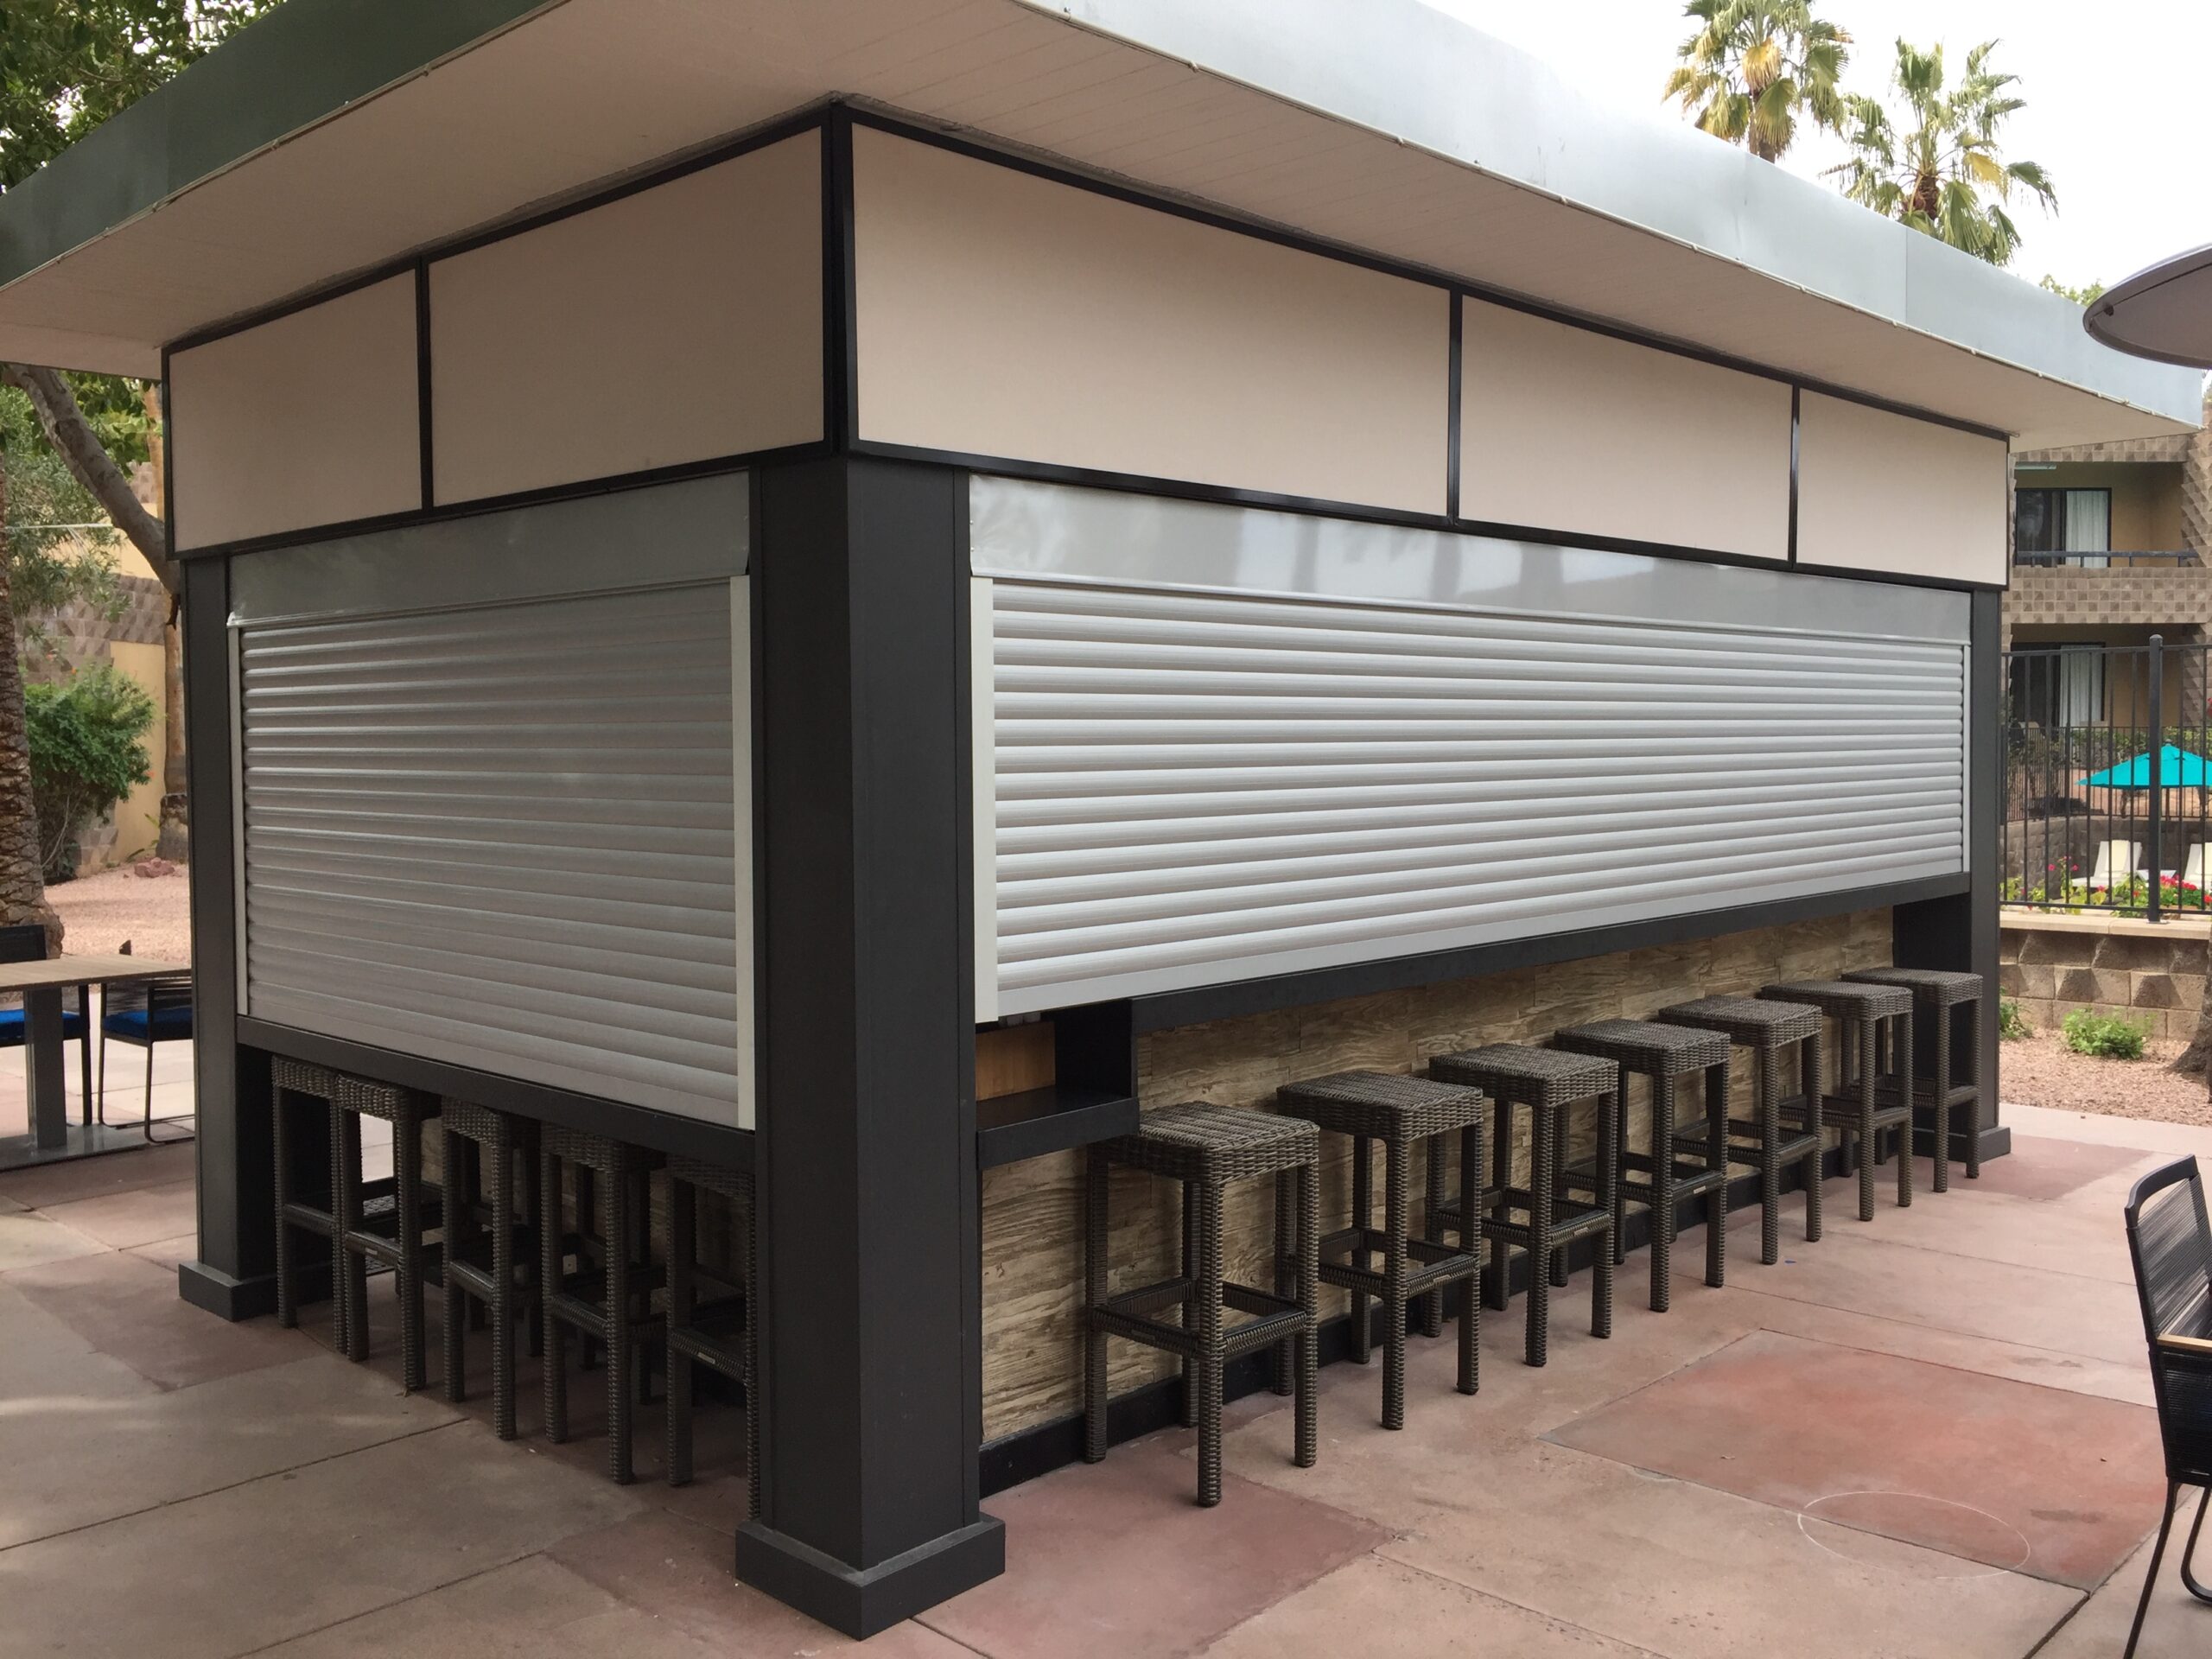 An image showing an outdoor bar with all its commercial rolling shutters closed